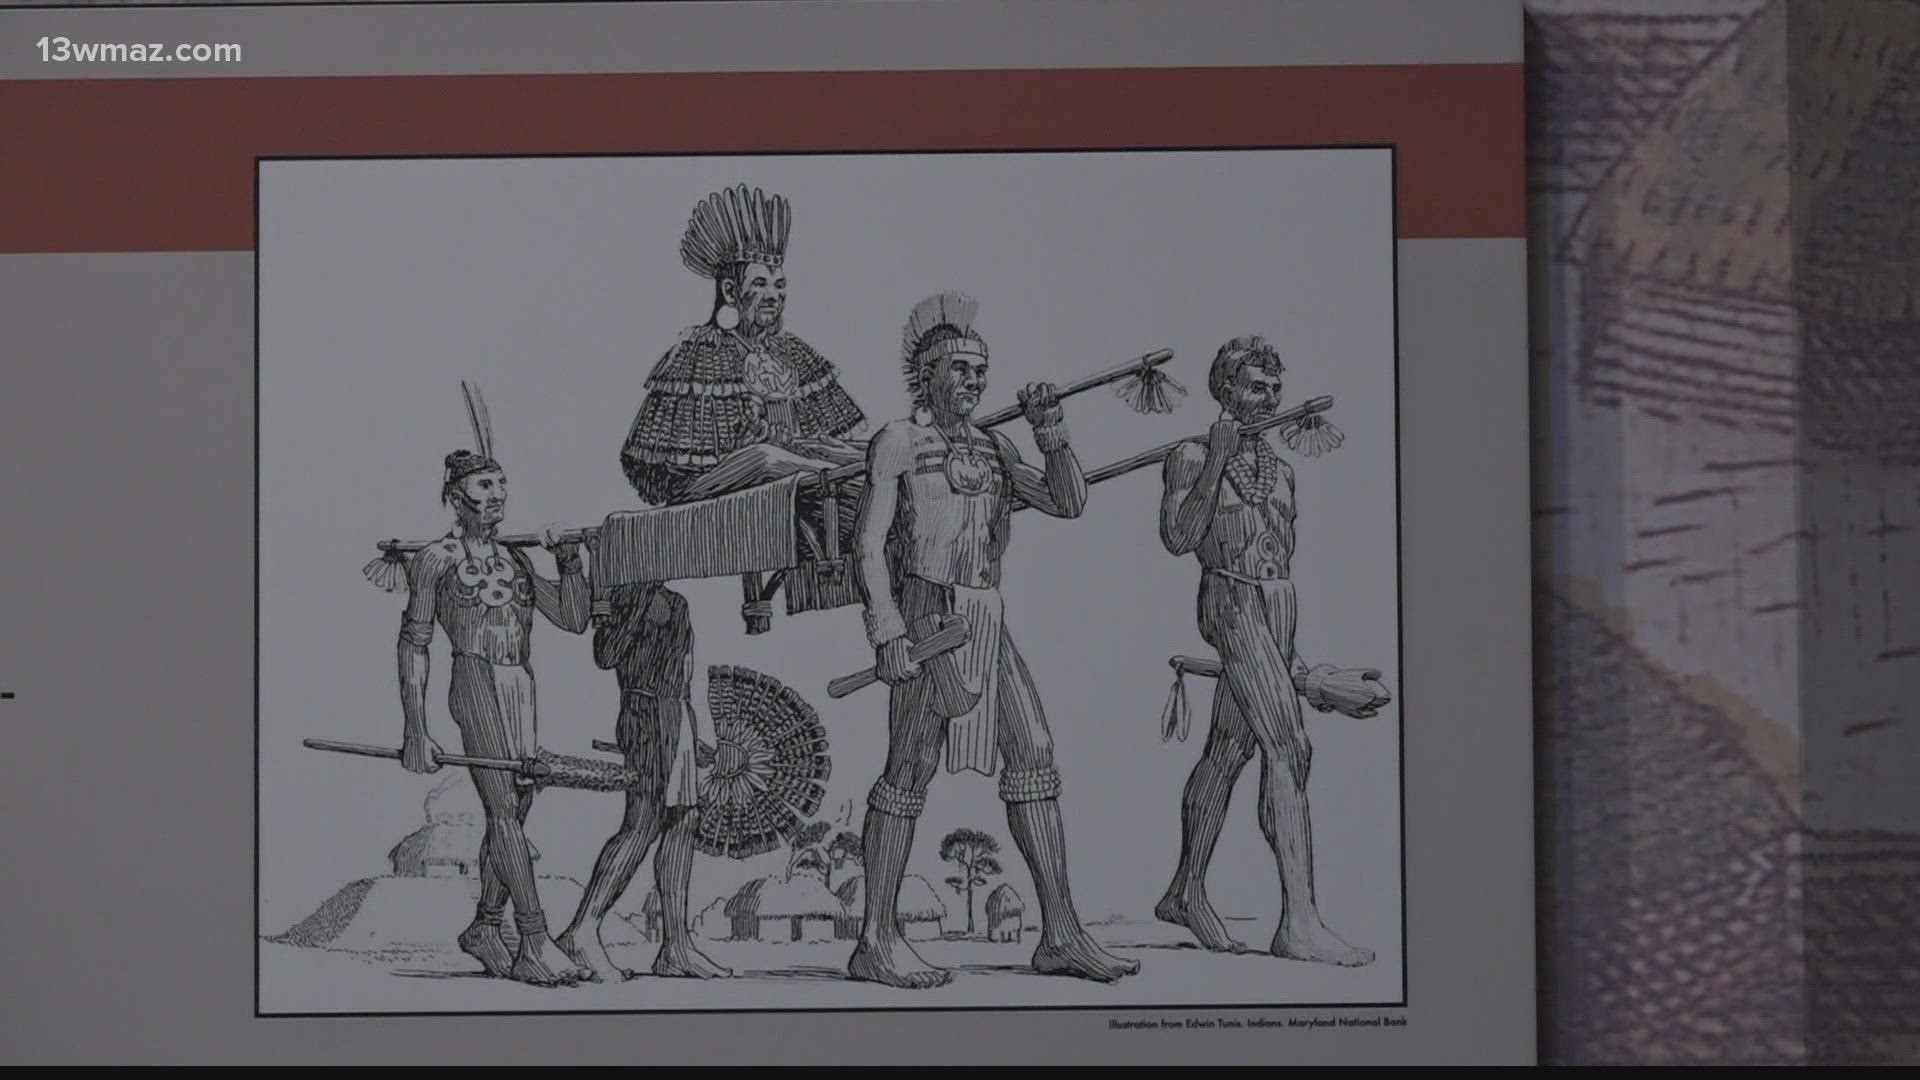 The Ocmulgee Mounds Association brings back their Indigenous celebration after going virtual because of the pandemic.